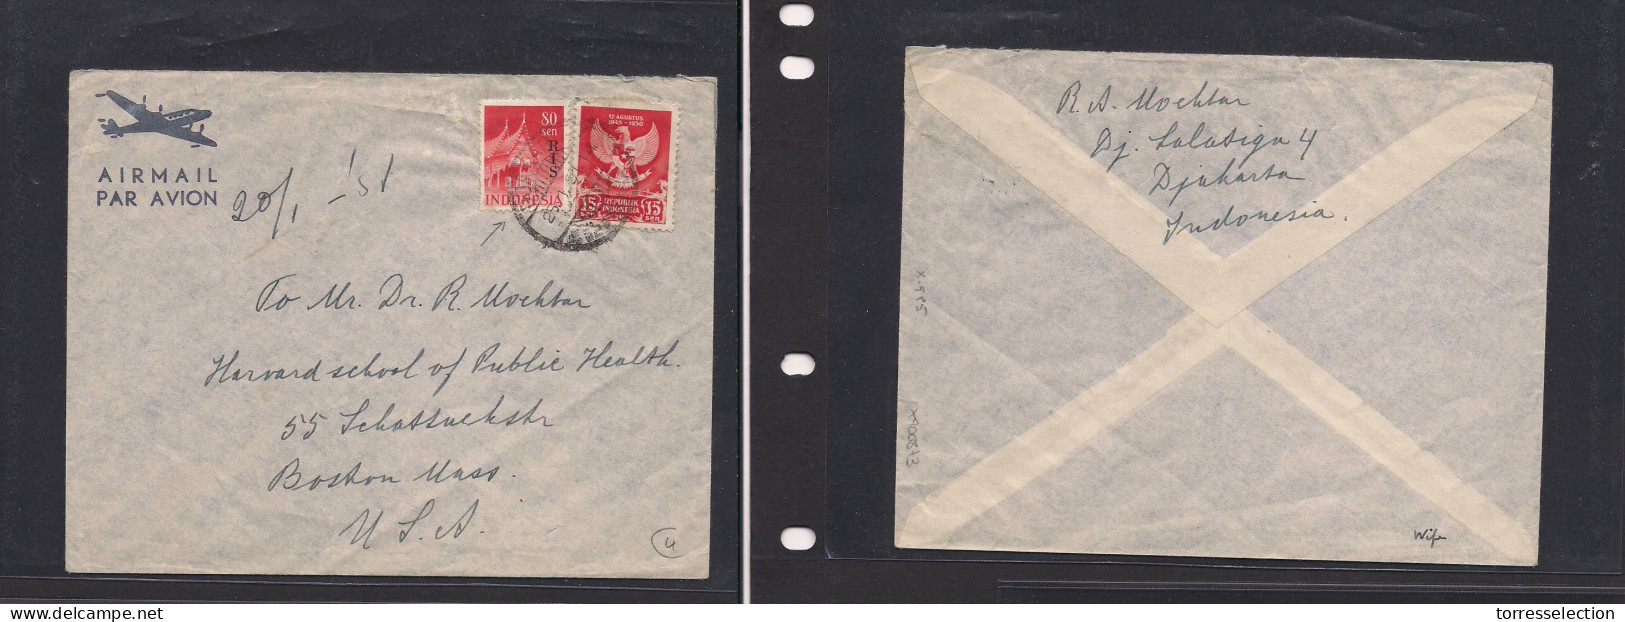 DUTCH INDIES. Dutch Indies - Cover - Indonesia RIS 1951 Djakarta To USA Boston. Easy Deal. - Indonesië